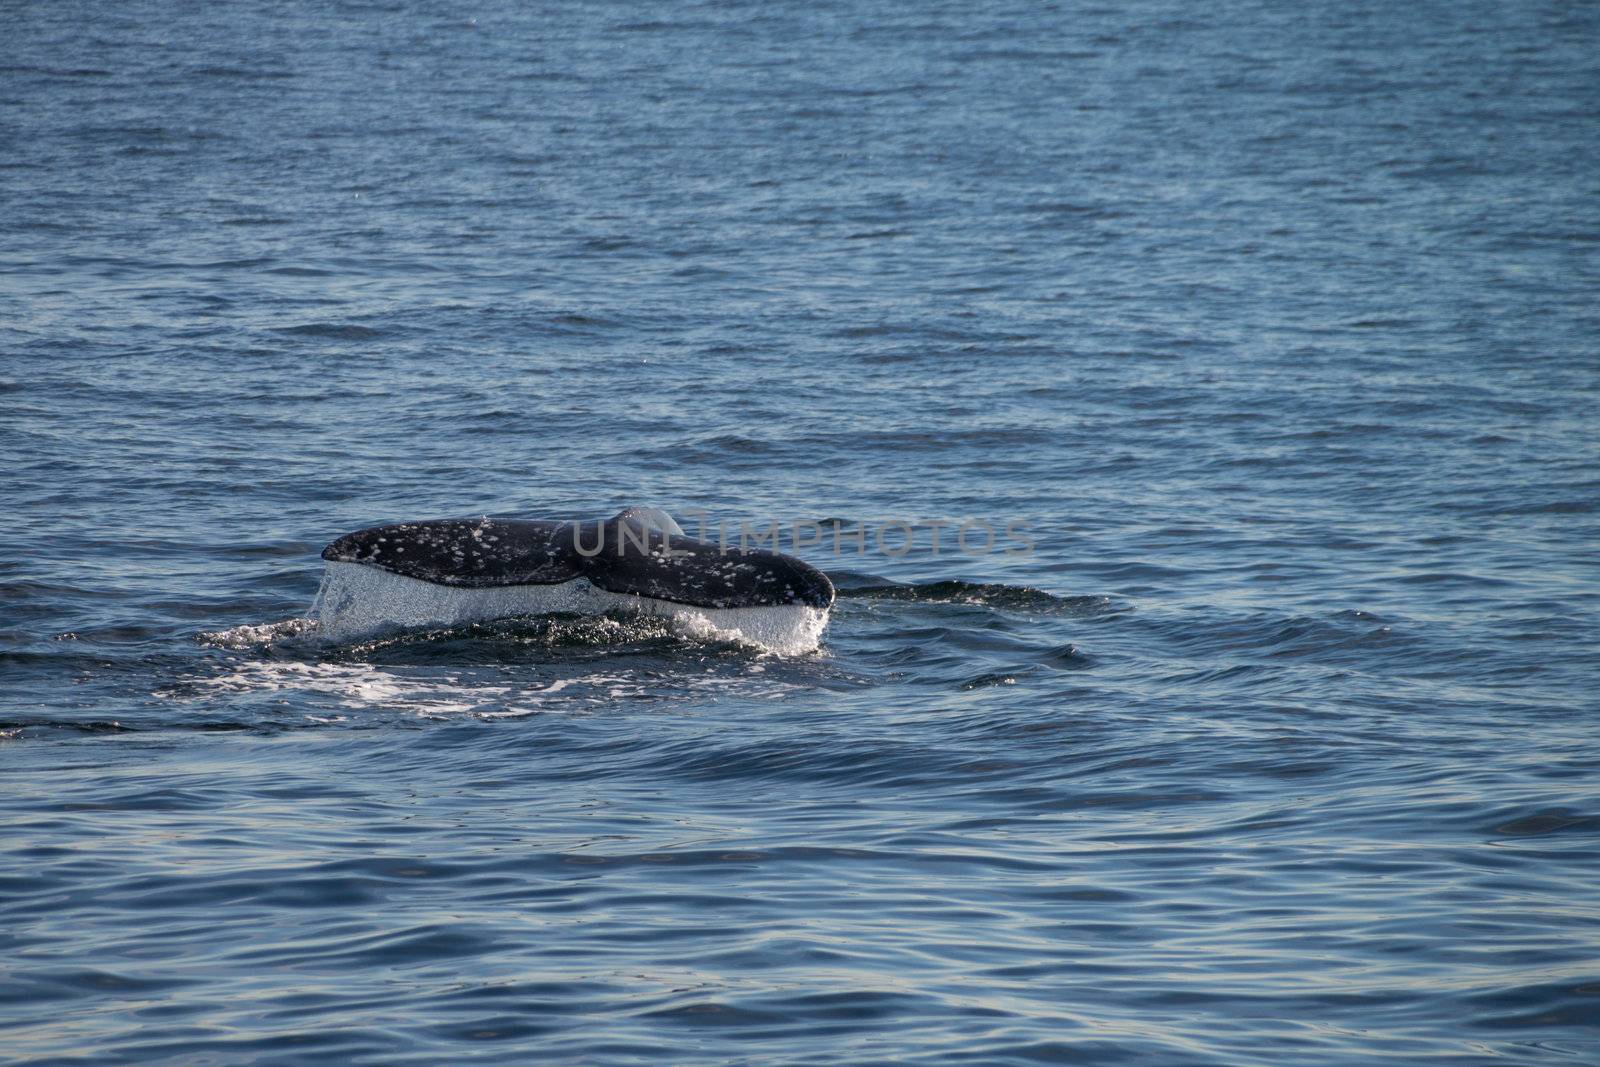 Gray whale migrating south off the coast of Oxnard, California